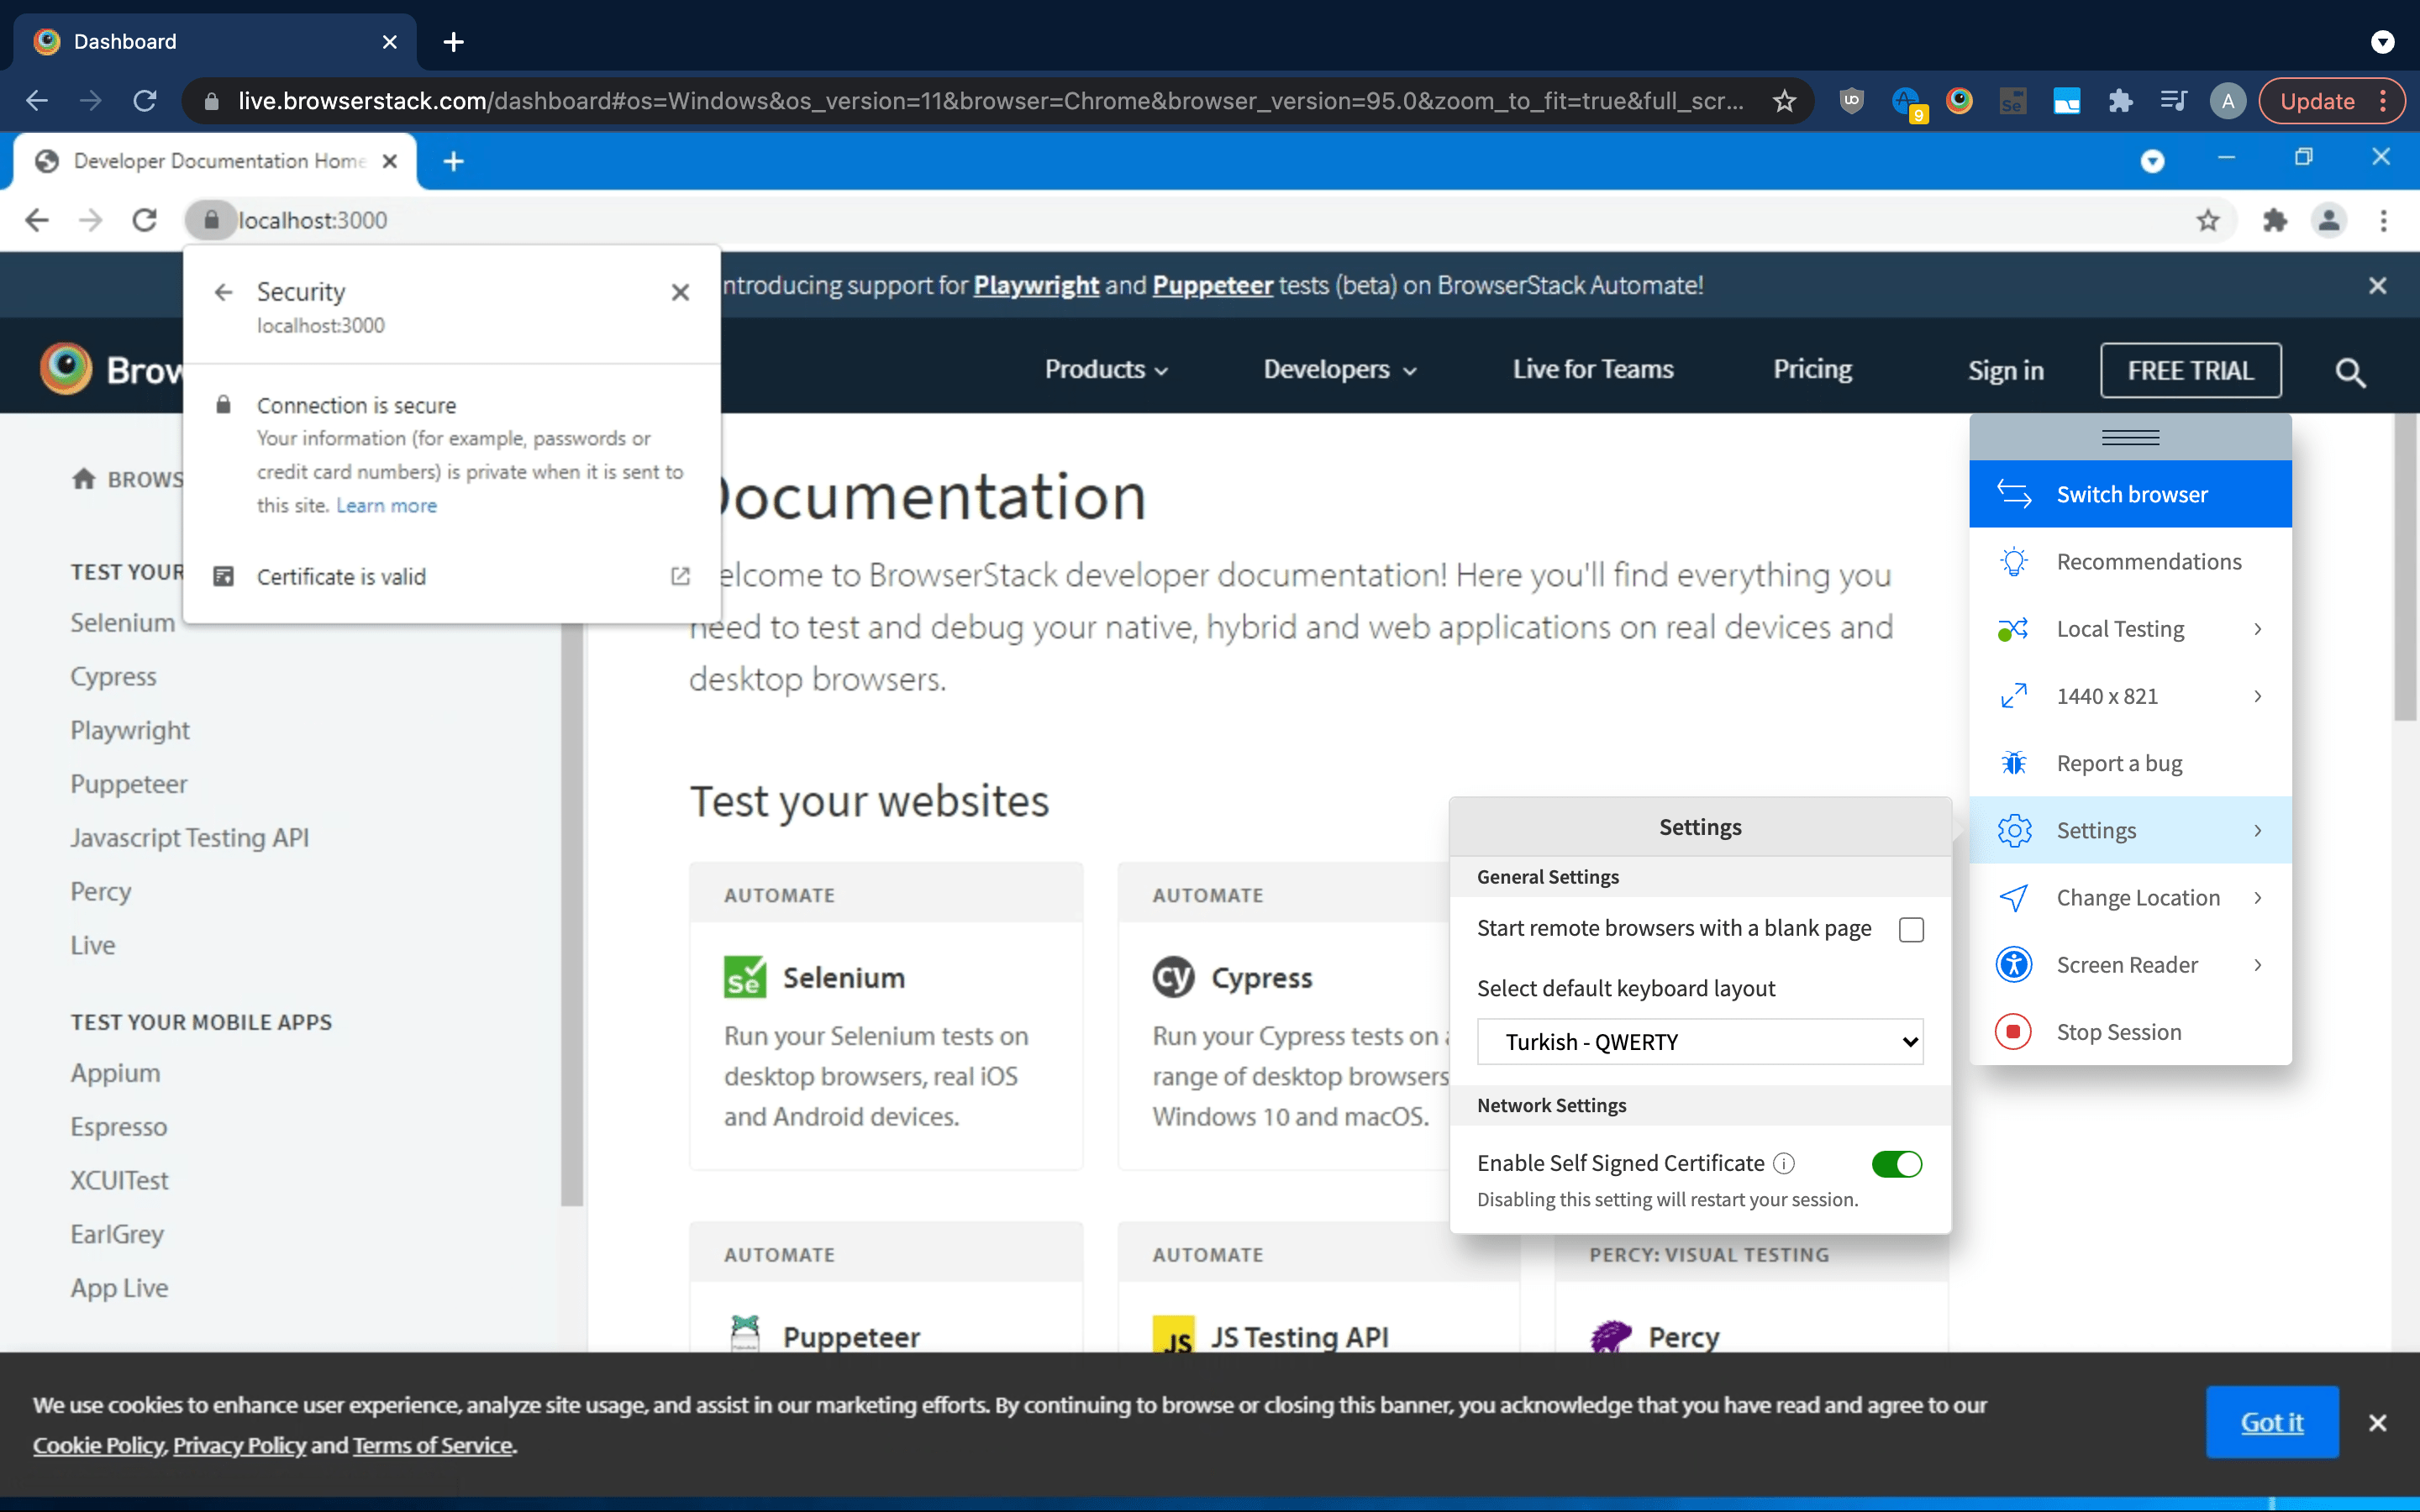 Enabling Self-Signed Certificate shows website as fully secure by the browser used in Live session